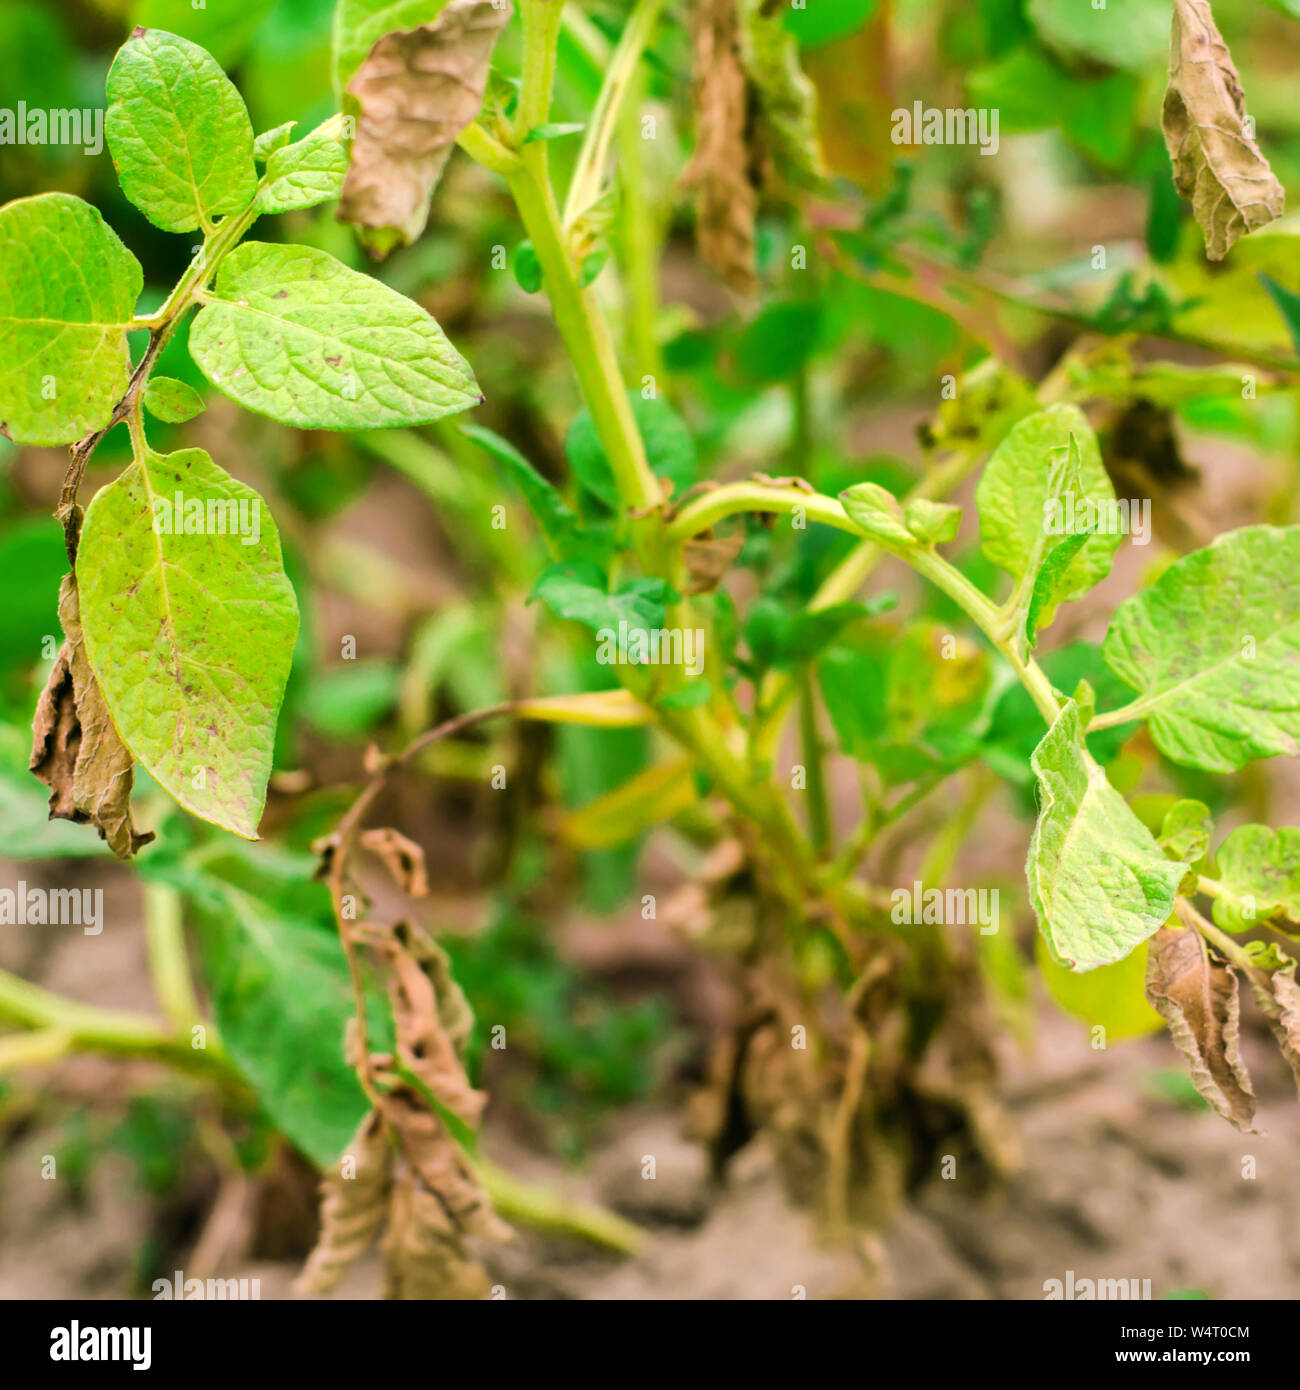 Leaves Of Potato With Diseases. Plant Of Potato Stricken Phytophthora (Phytophthora Infestans) In the field. Close Up. vegetables. farm agriculture. c Stock Photo